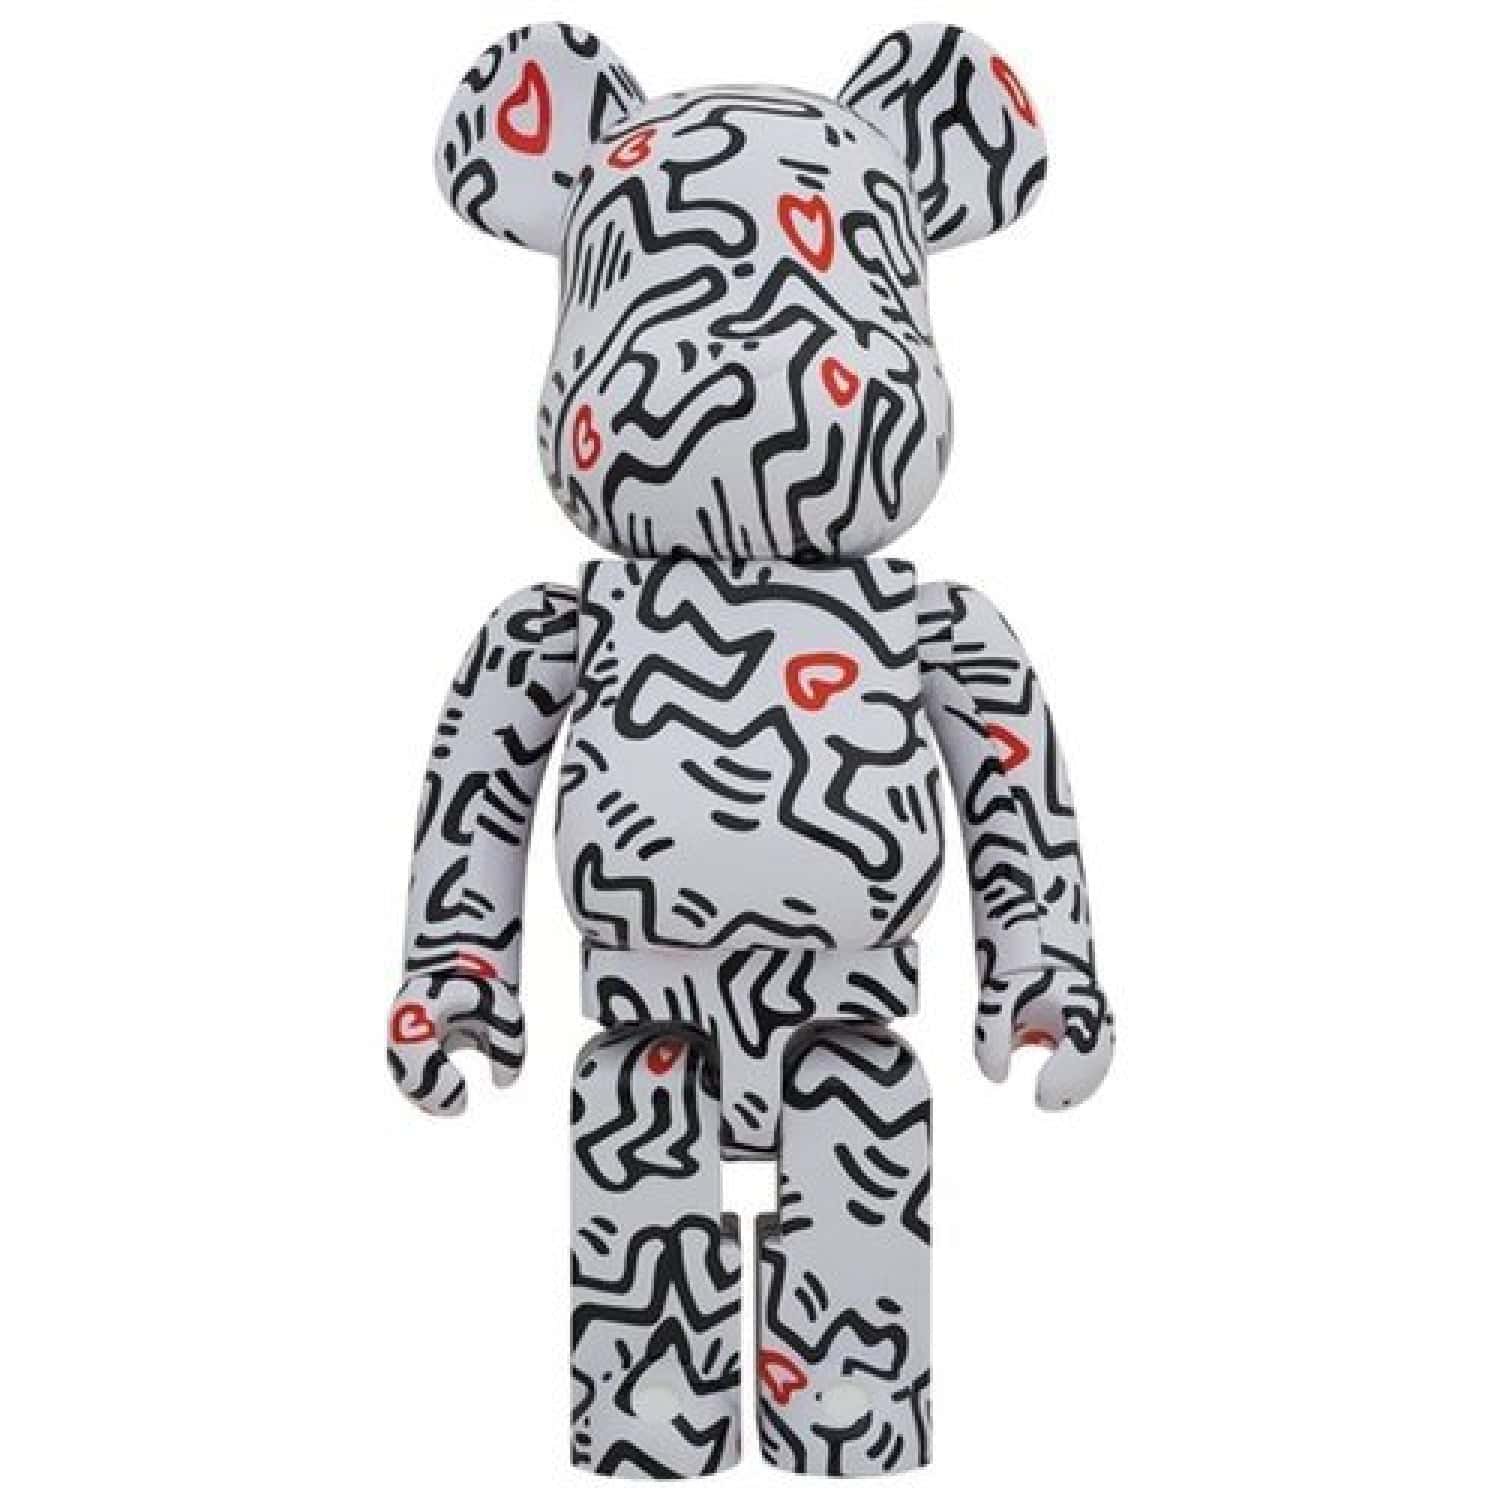 “Keith Haring V8” from Be@rbrick - Dope! Gallery